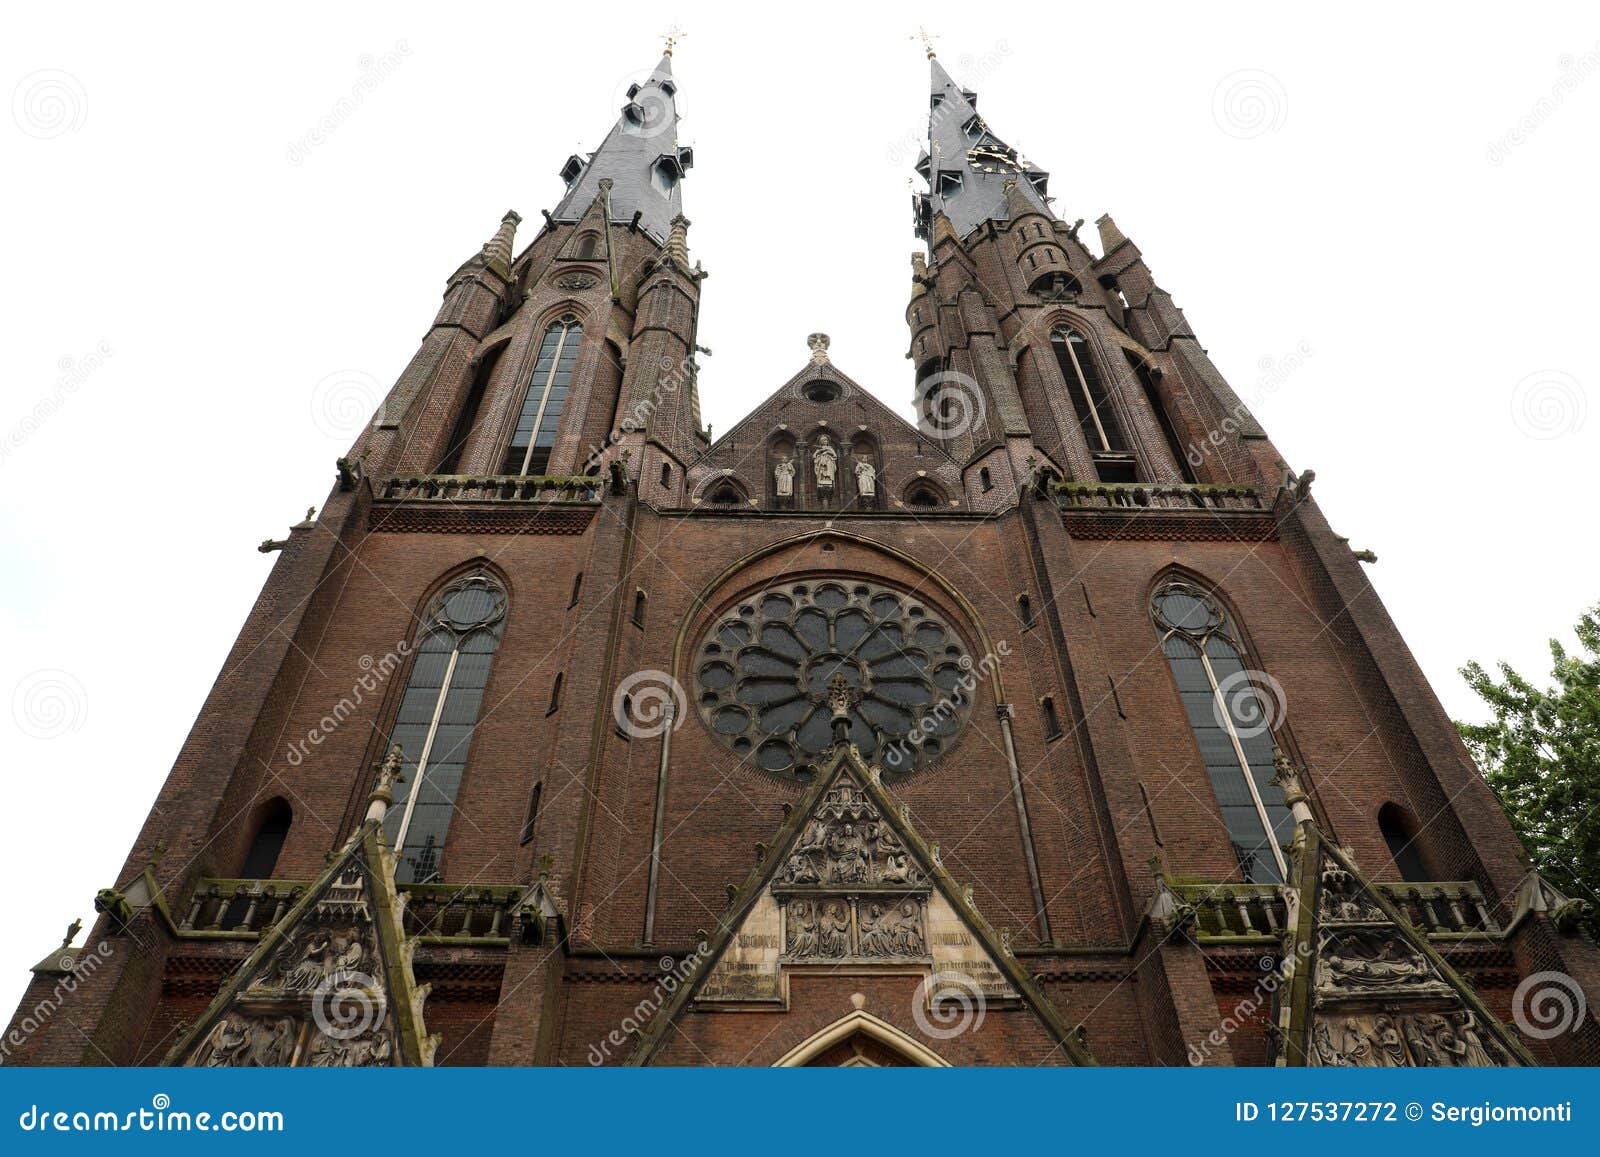 Church at Eindhoven, Netherlands Stock Photo - Image historic, architecture: 127537272